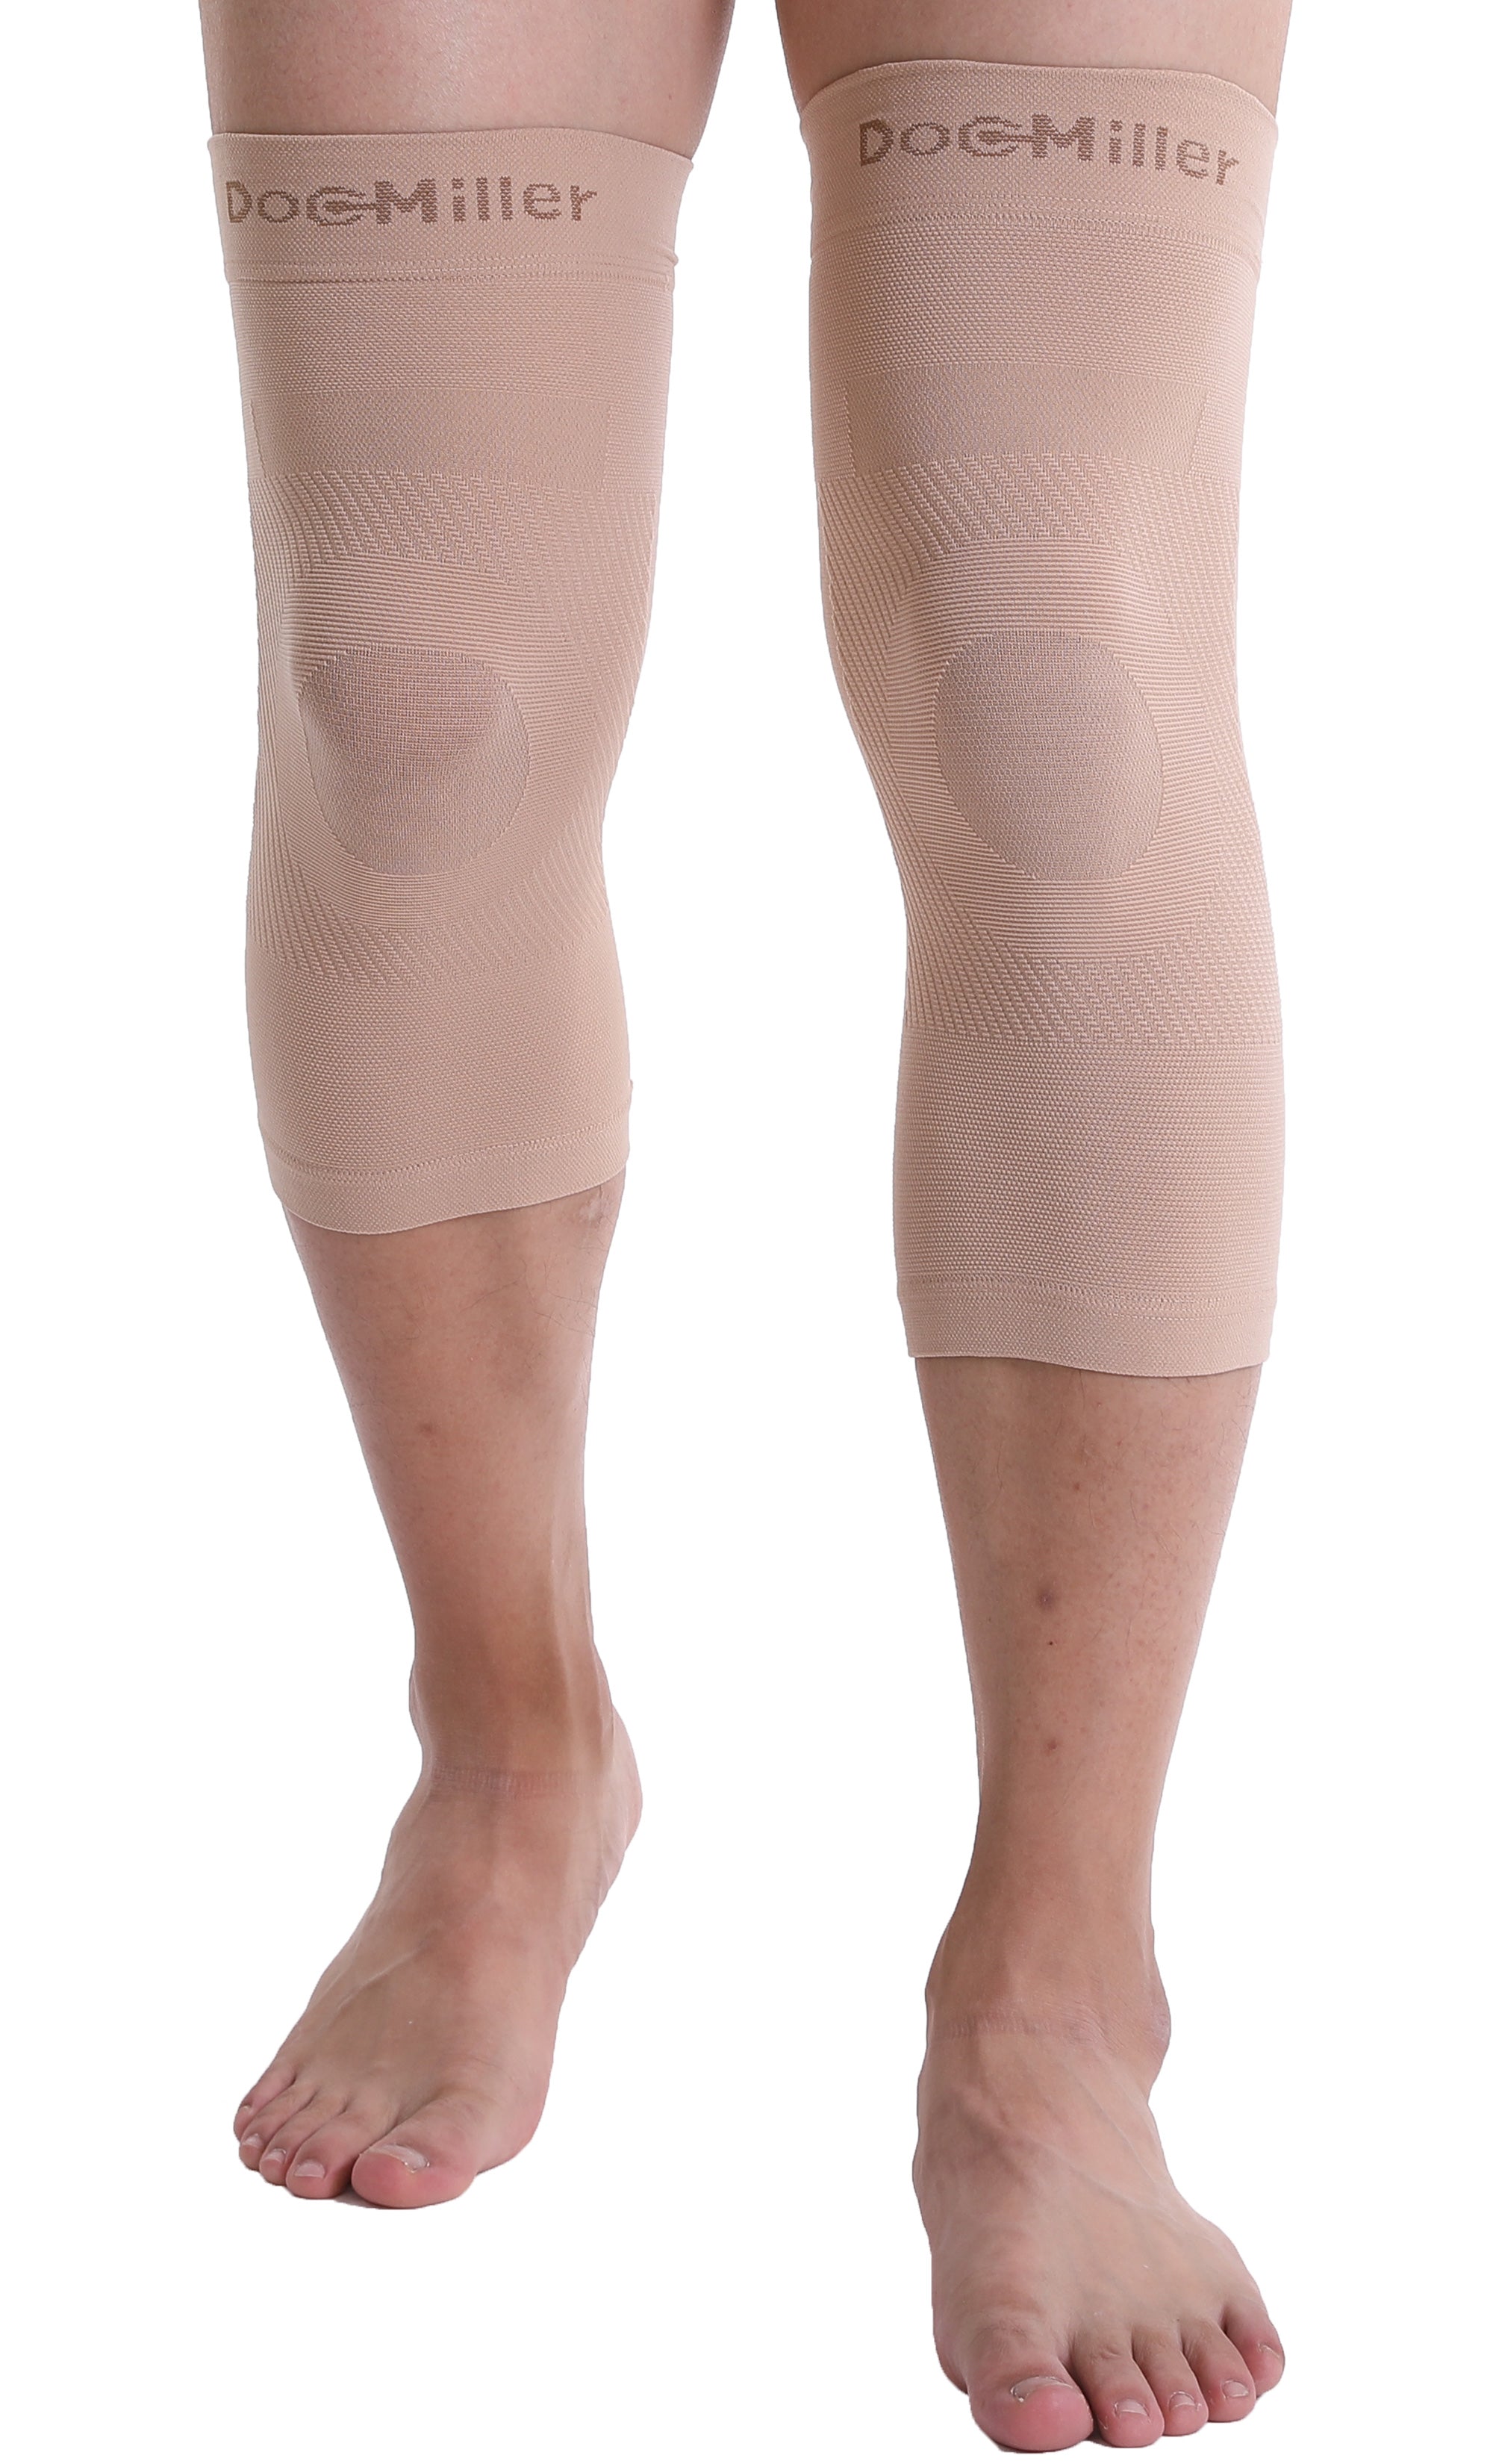 Thigh Compression Sleeves SKIN/NUDE by Doc Miller